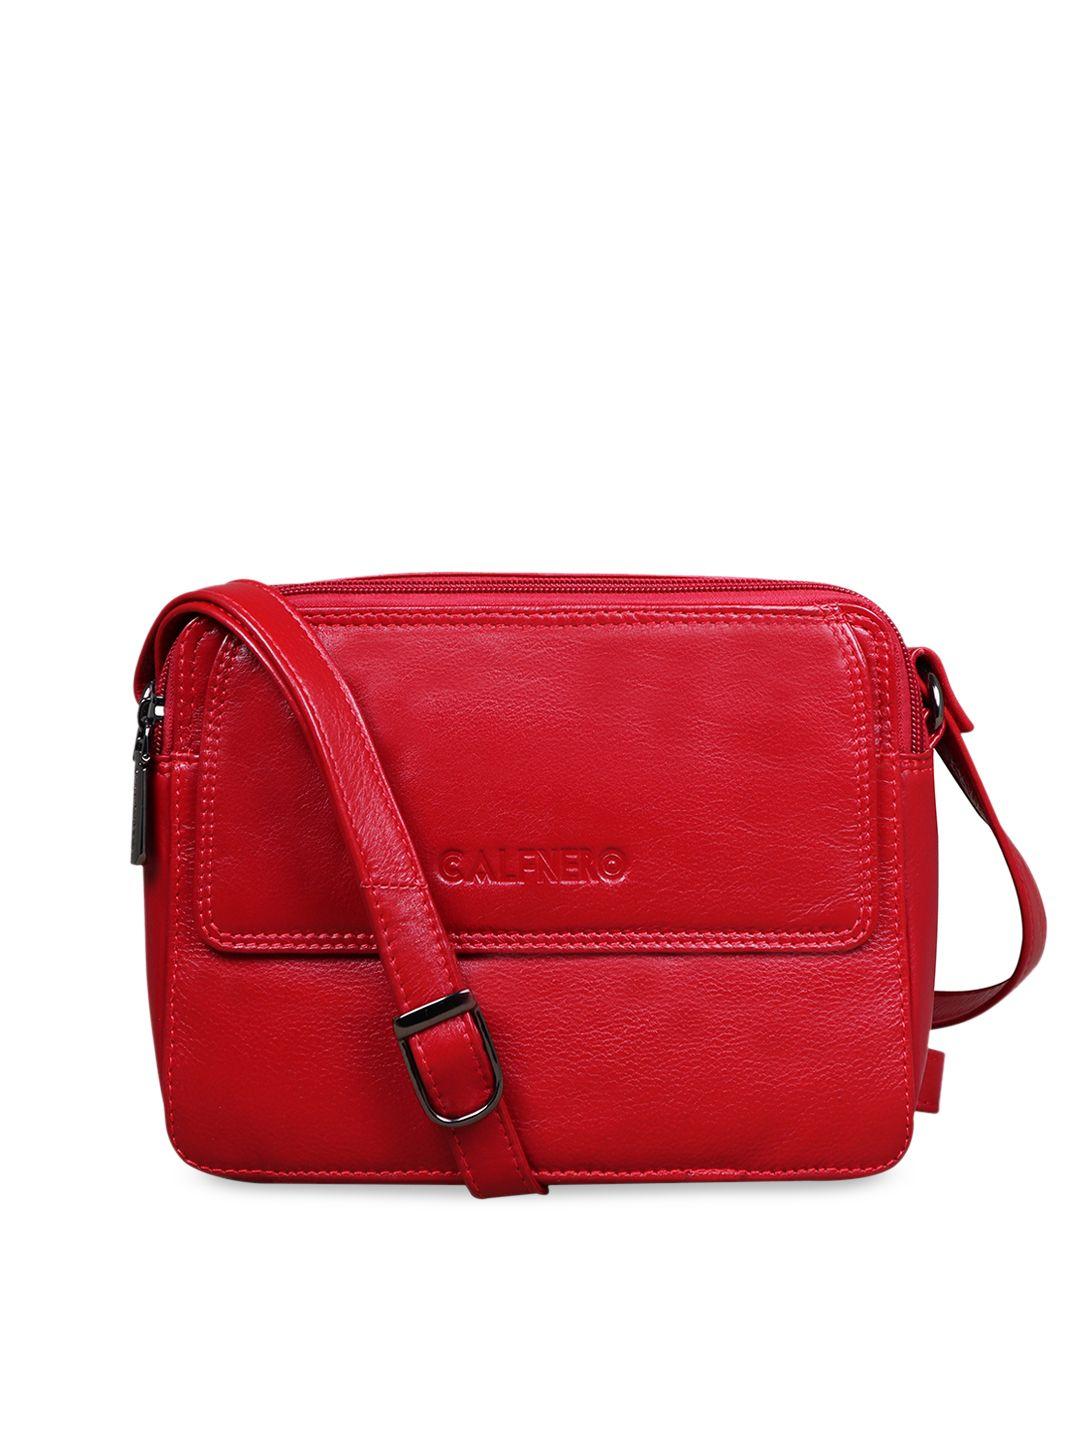 calfnero women red leather structured sling bag